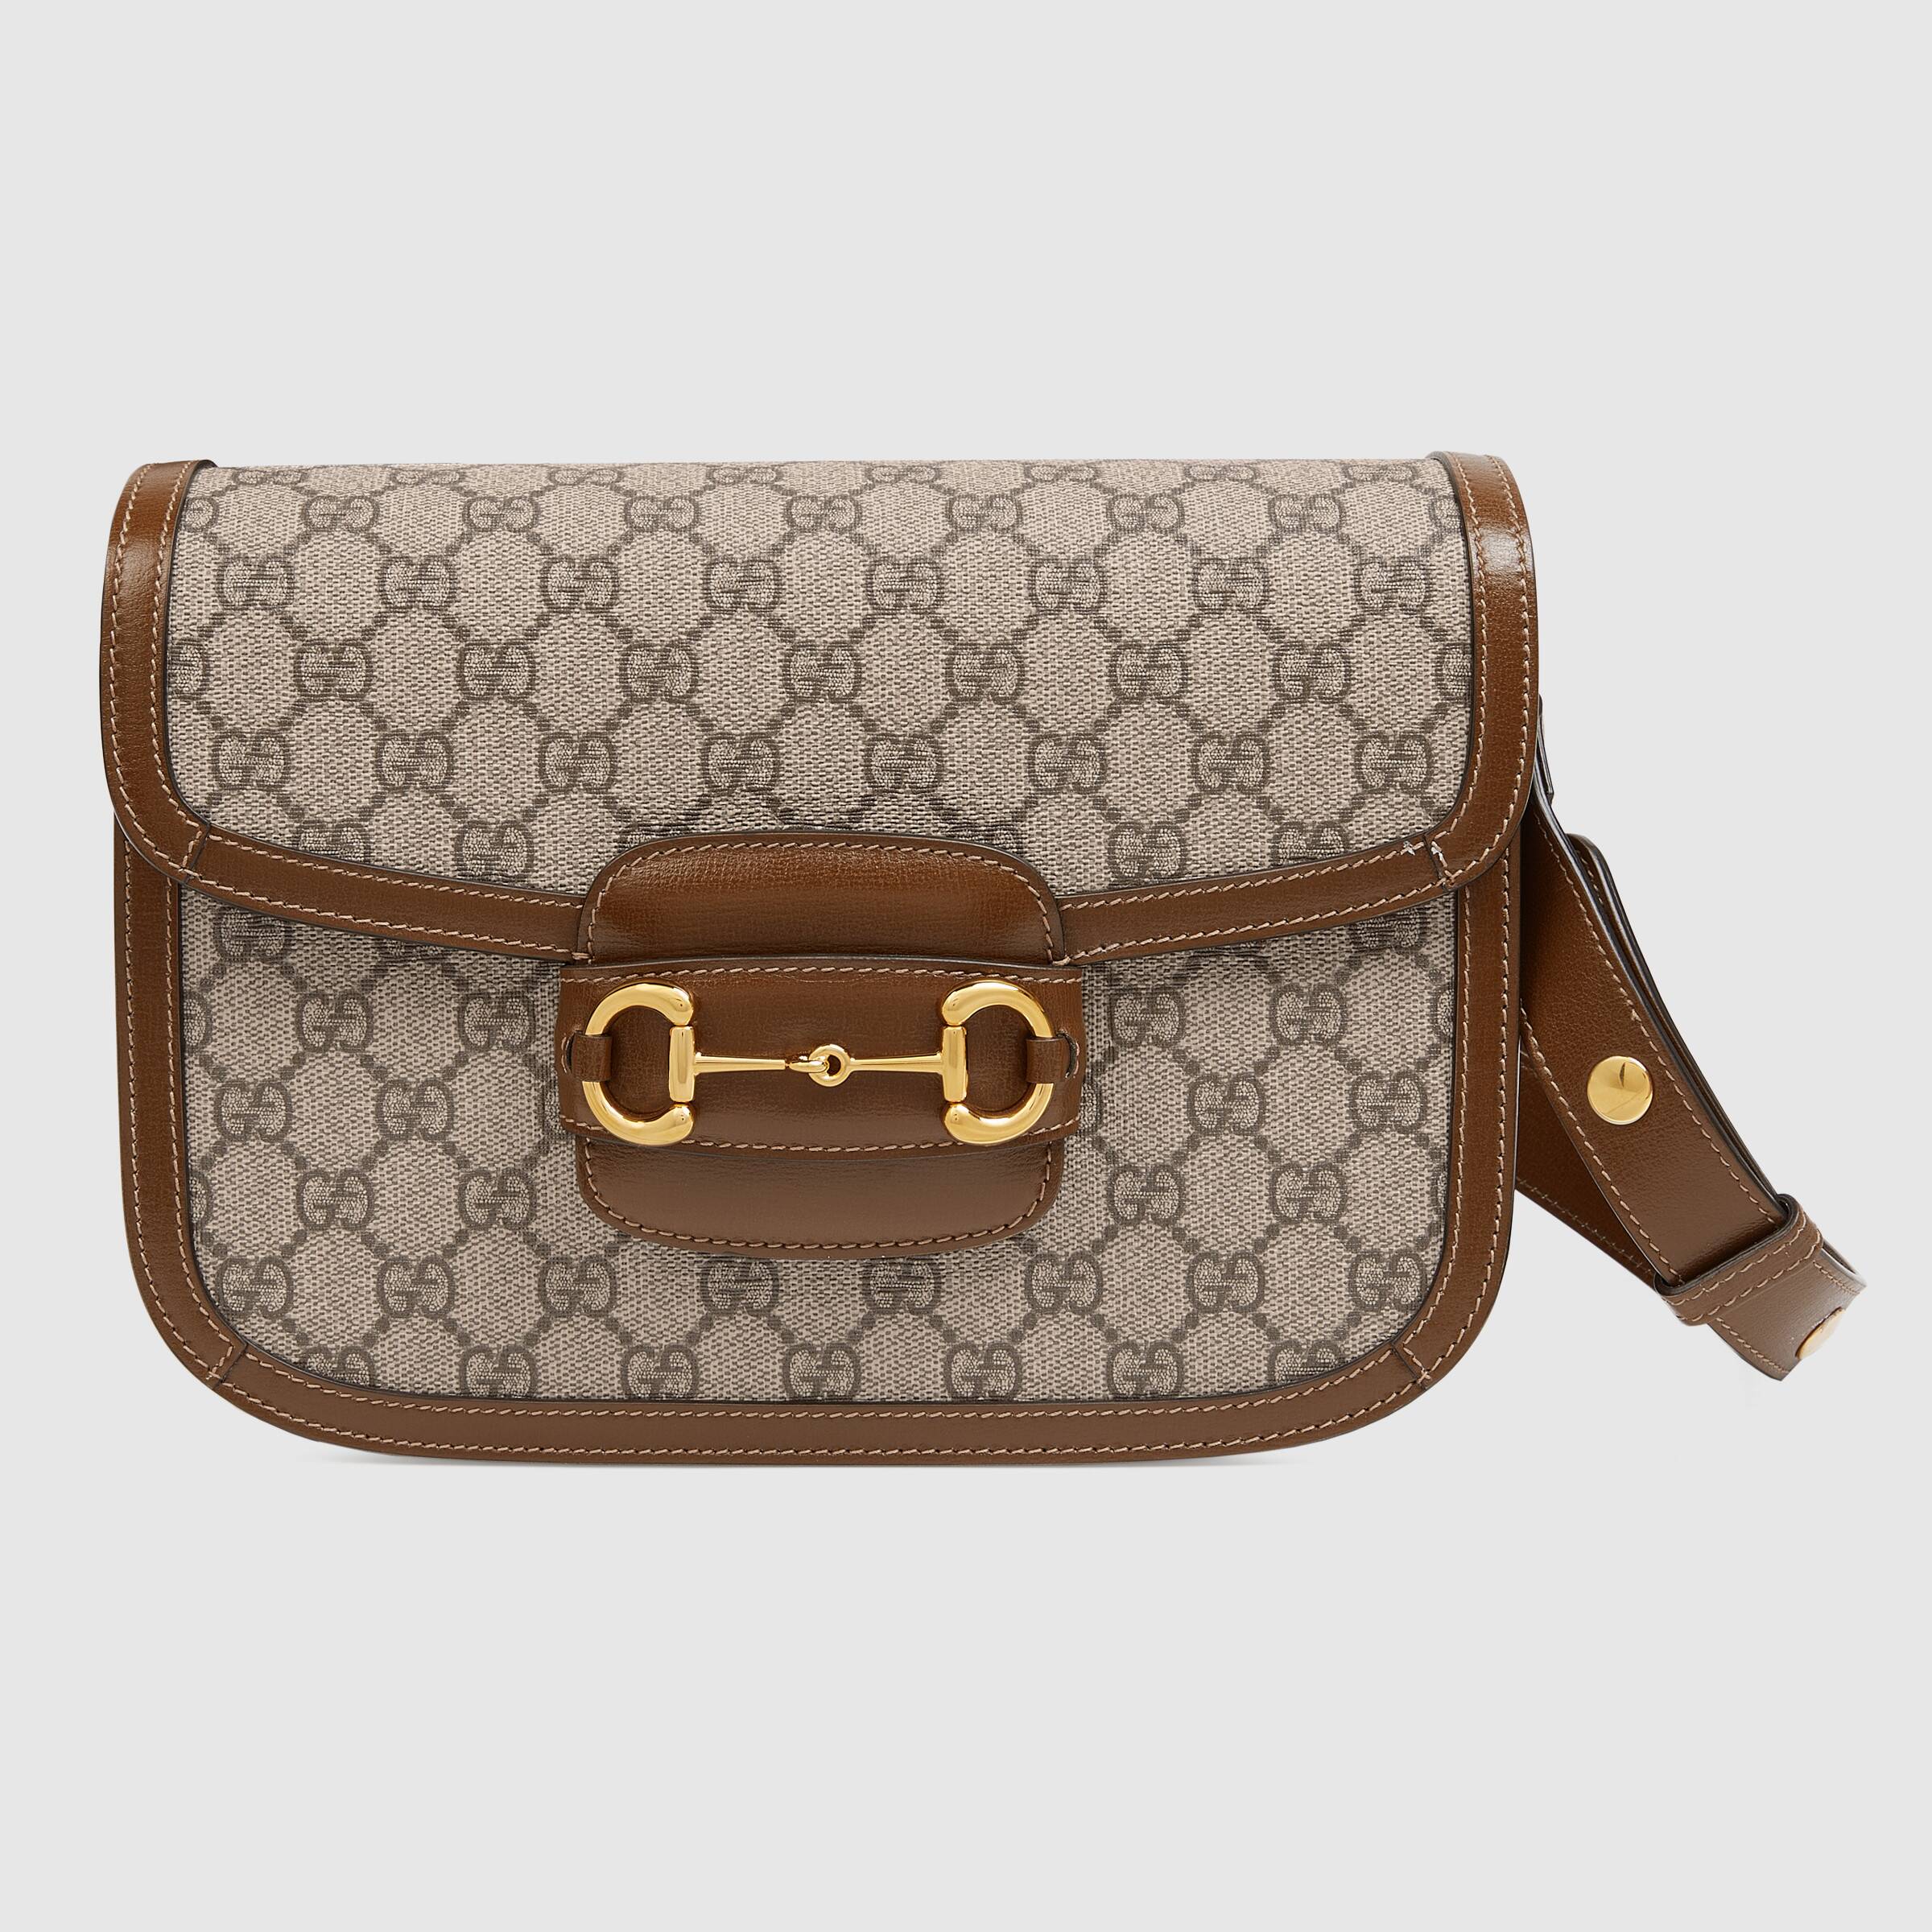 gucci sling bag new arrival